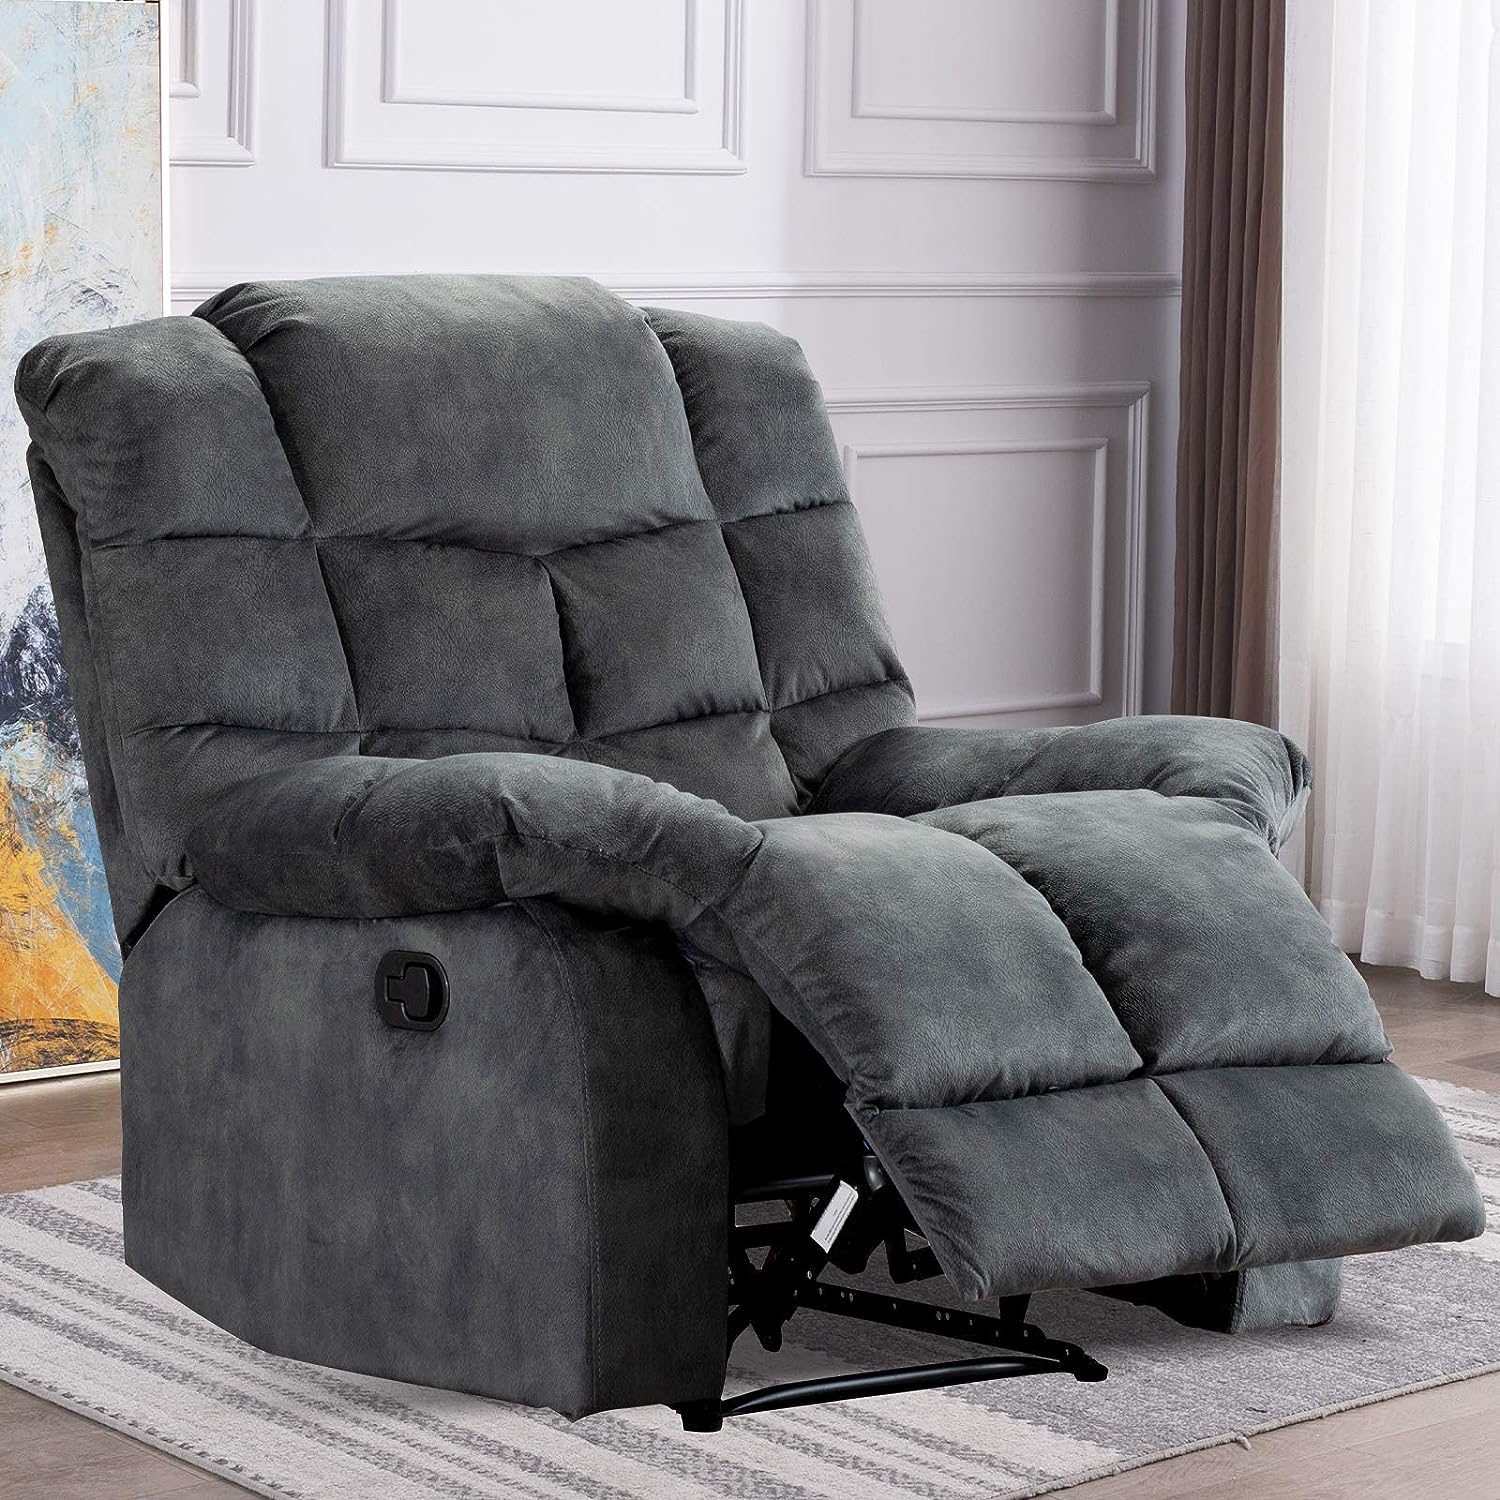 ANJHOME Single Recliner Chairs for Living Room [...]